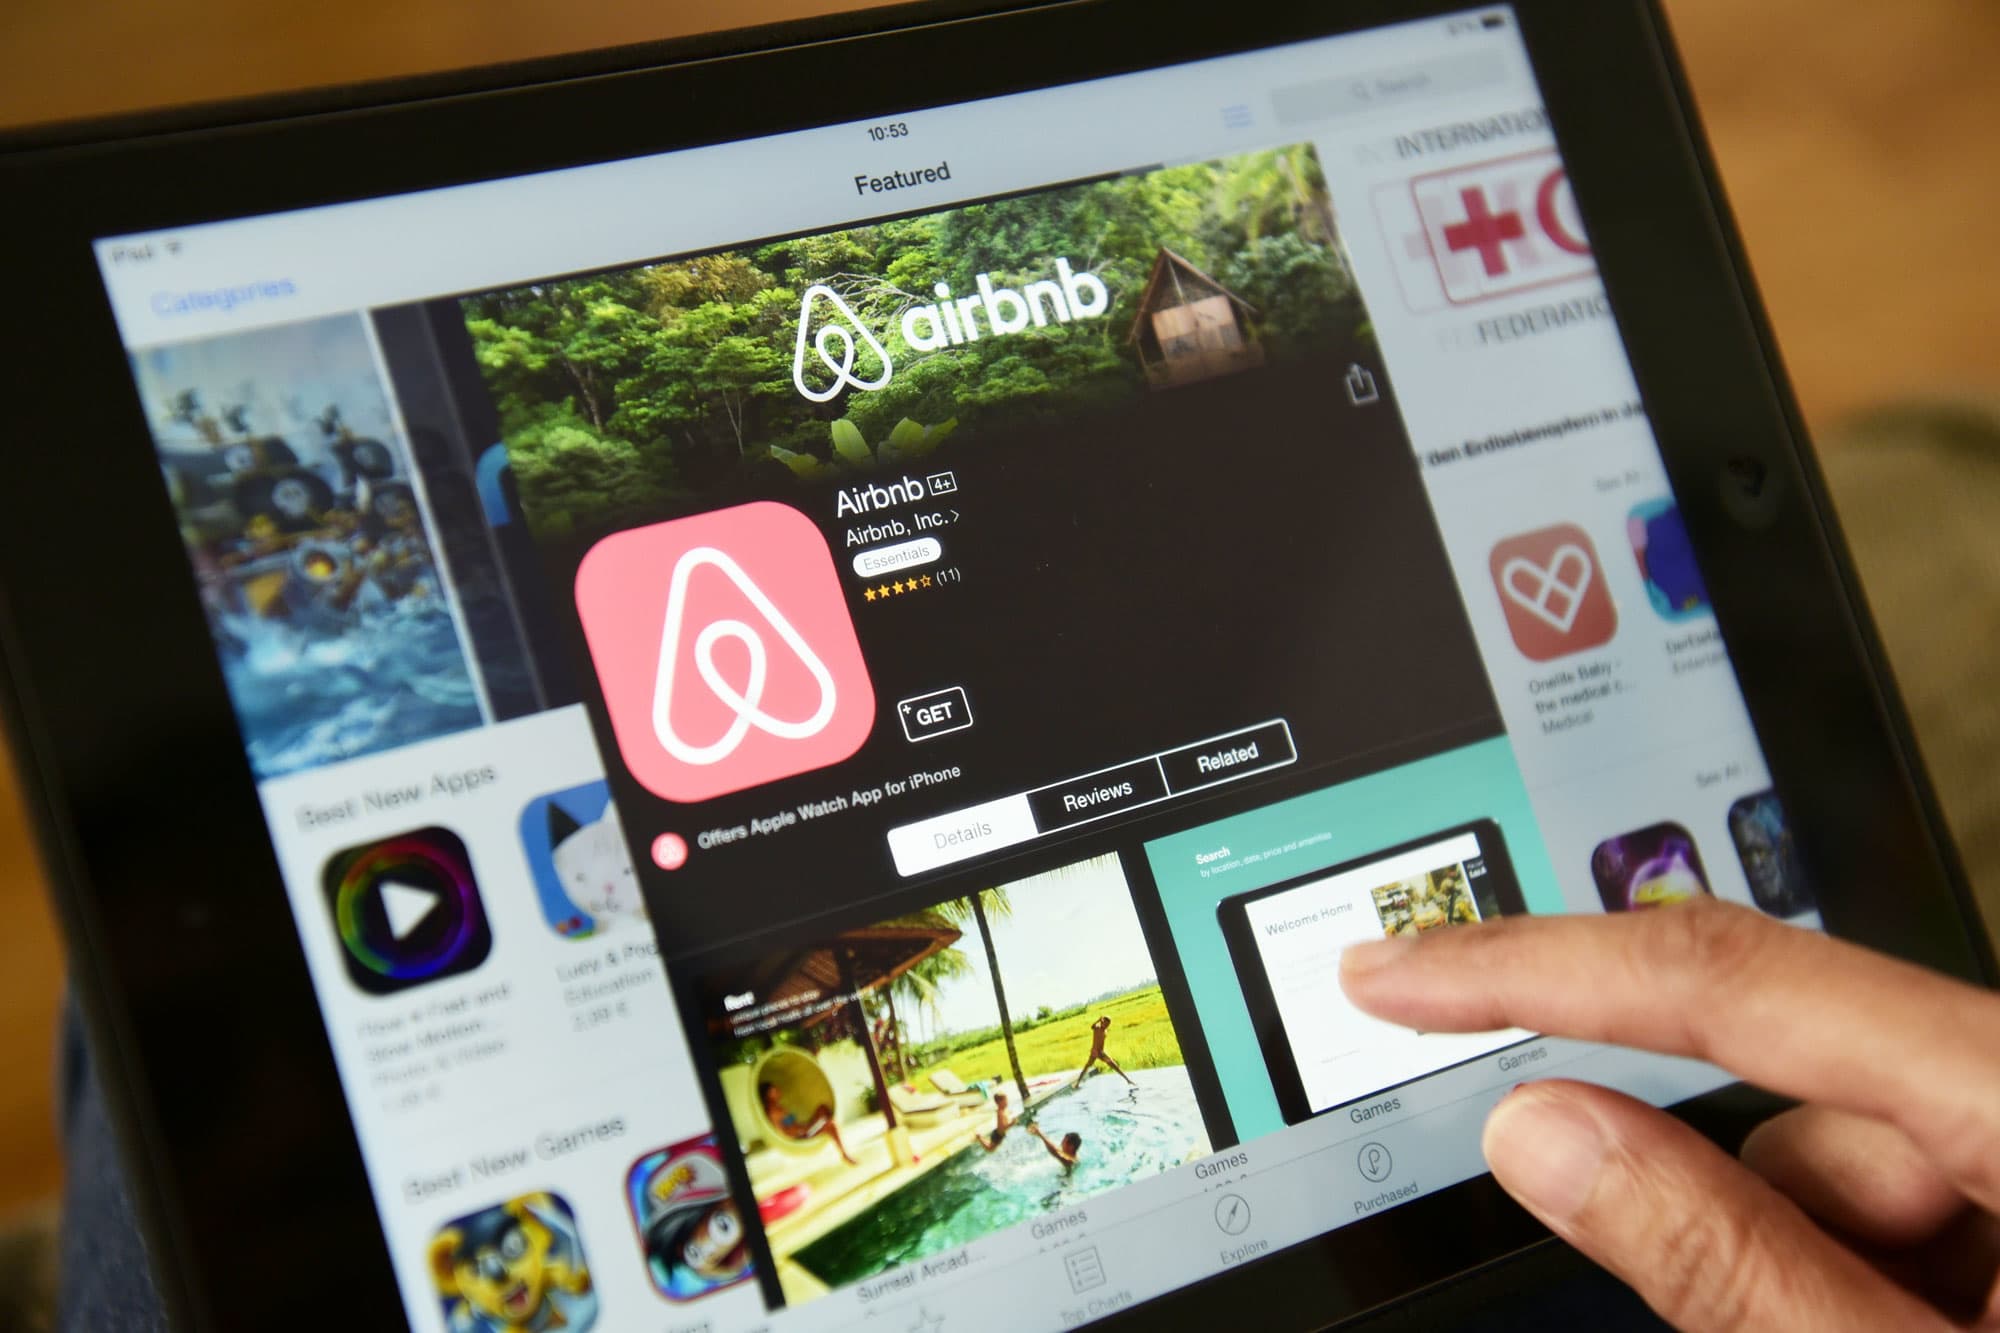 Airbnb earnings (ABNB) in the fourth quarter of 2020